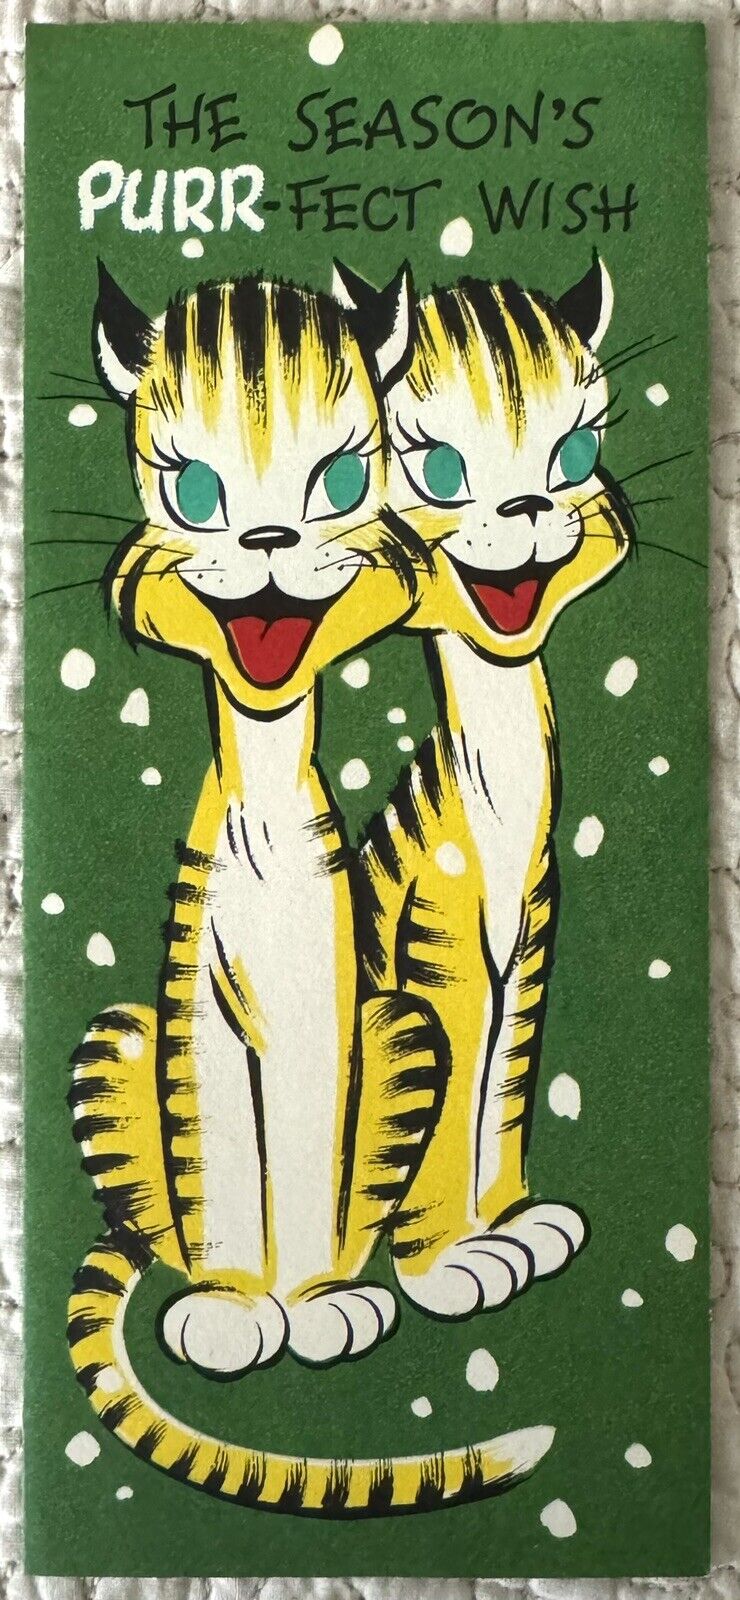 Unused Christmas Cats Kitten Pair Purrfect Wish Vtg Greeting Card 1950s 1960s